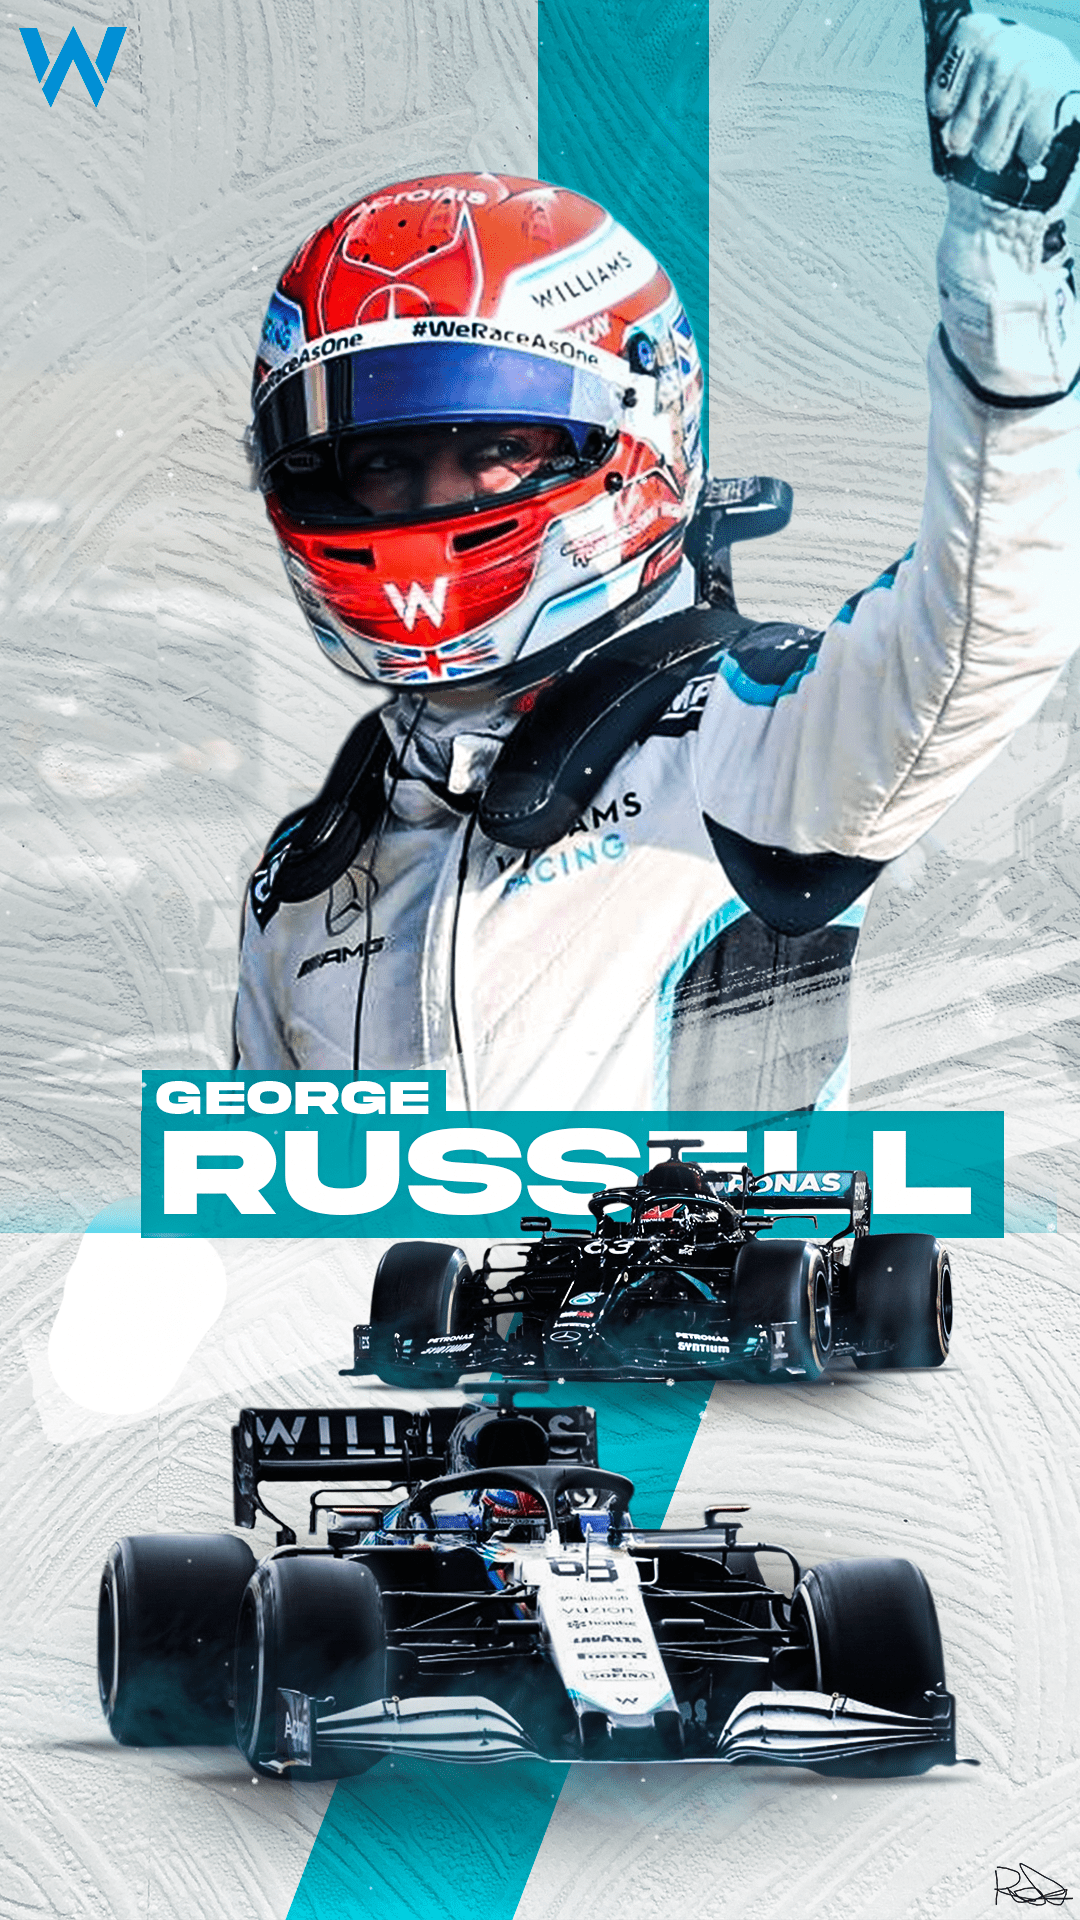 George Russell Artwork (phone wallpaper size)